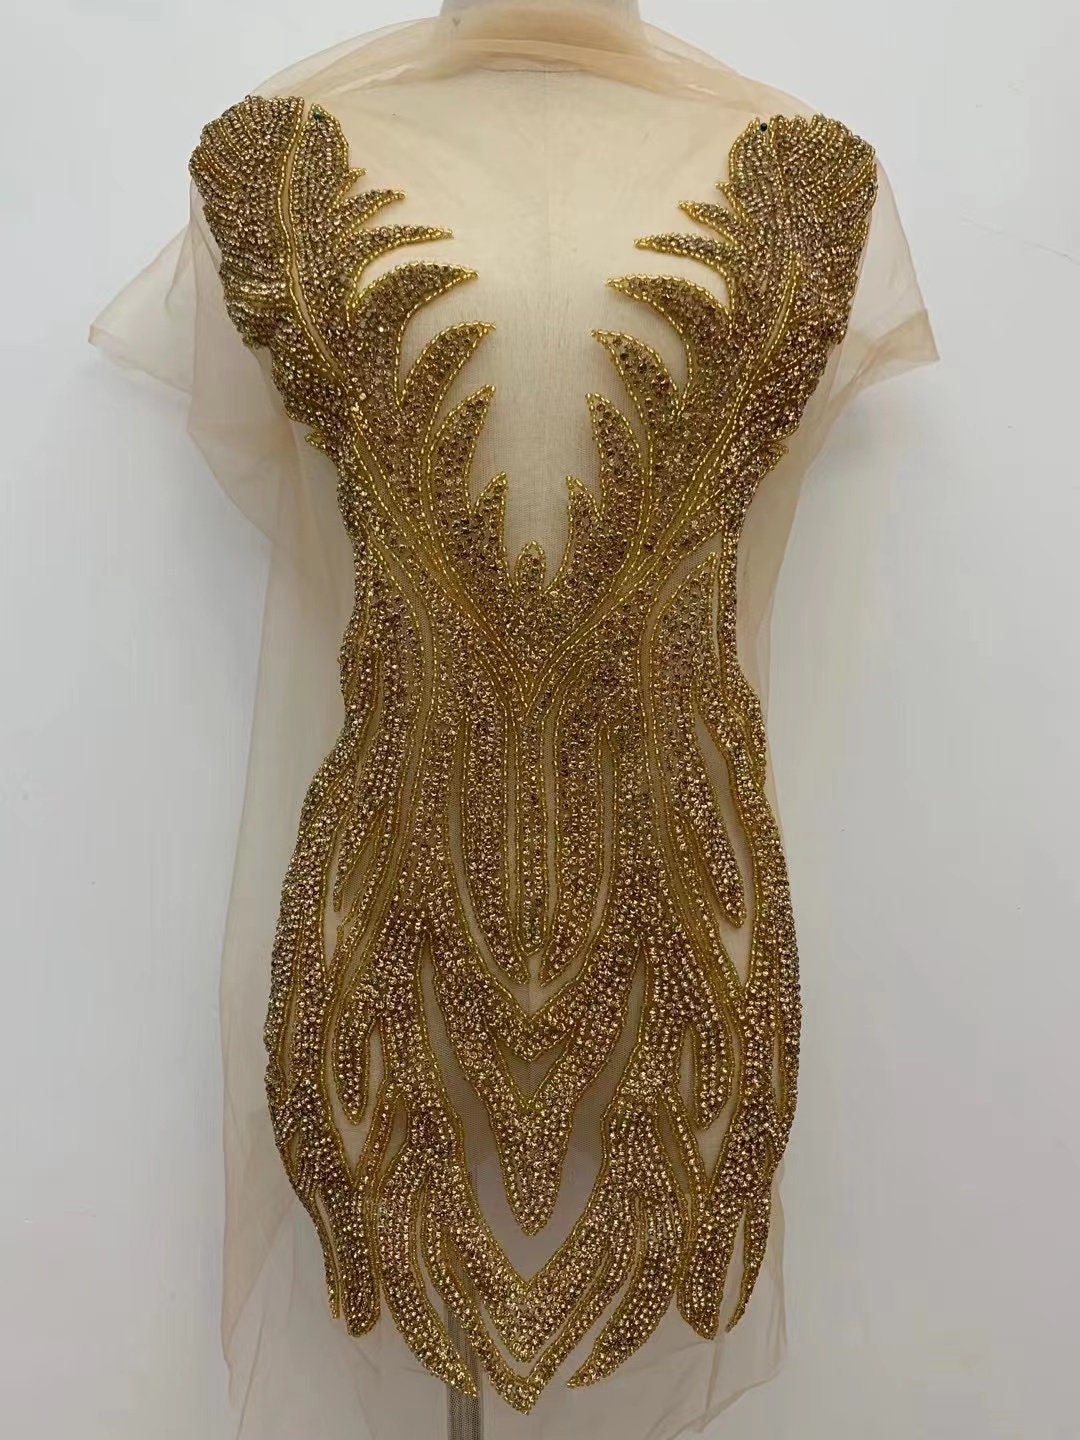 Gold Sequin Lace and Appliqué Dress, Elegant Prom Dress, Gold Evening  Dress, Wedding Reception Dress, African Lace Evening Gown, 